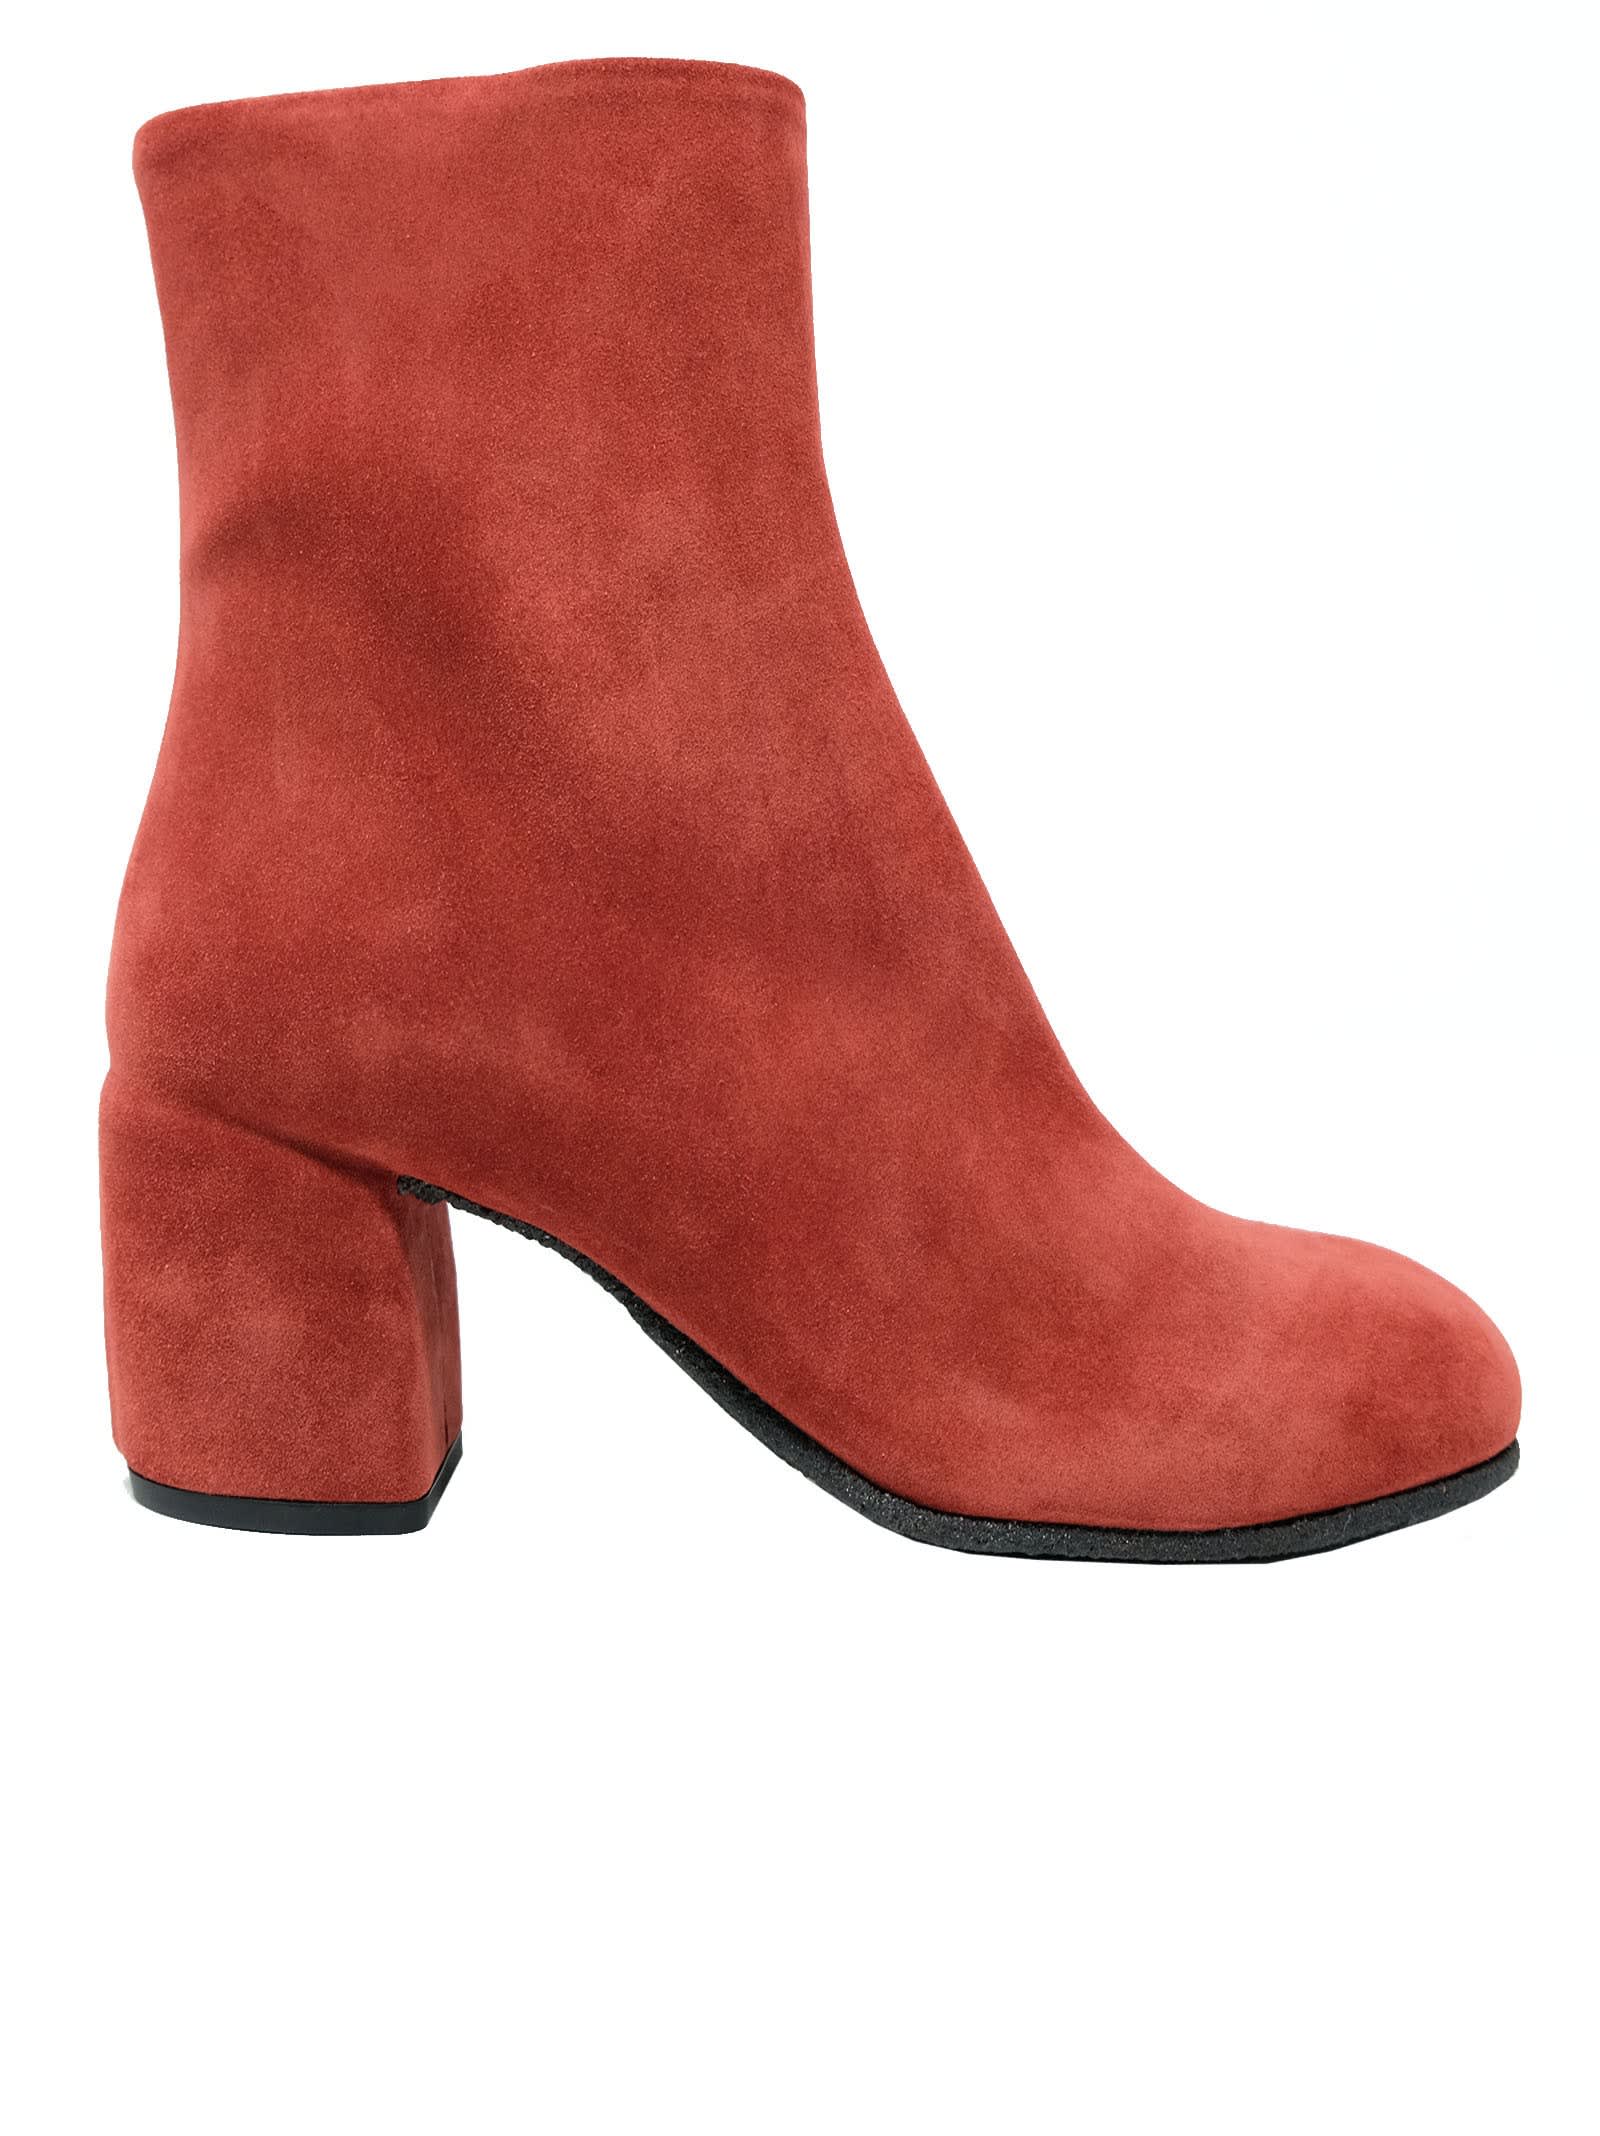 Del Carlo Roberto  Suede Ankle Boots In Burgundy